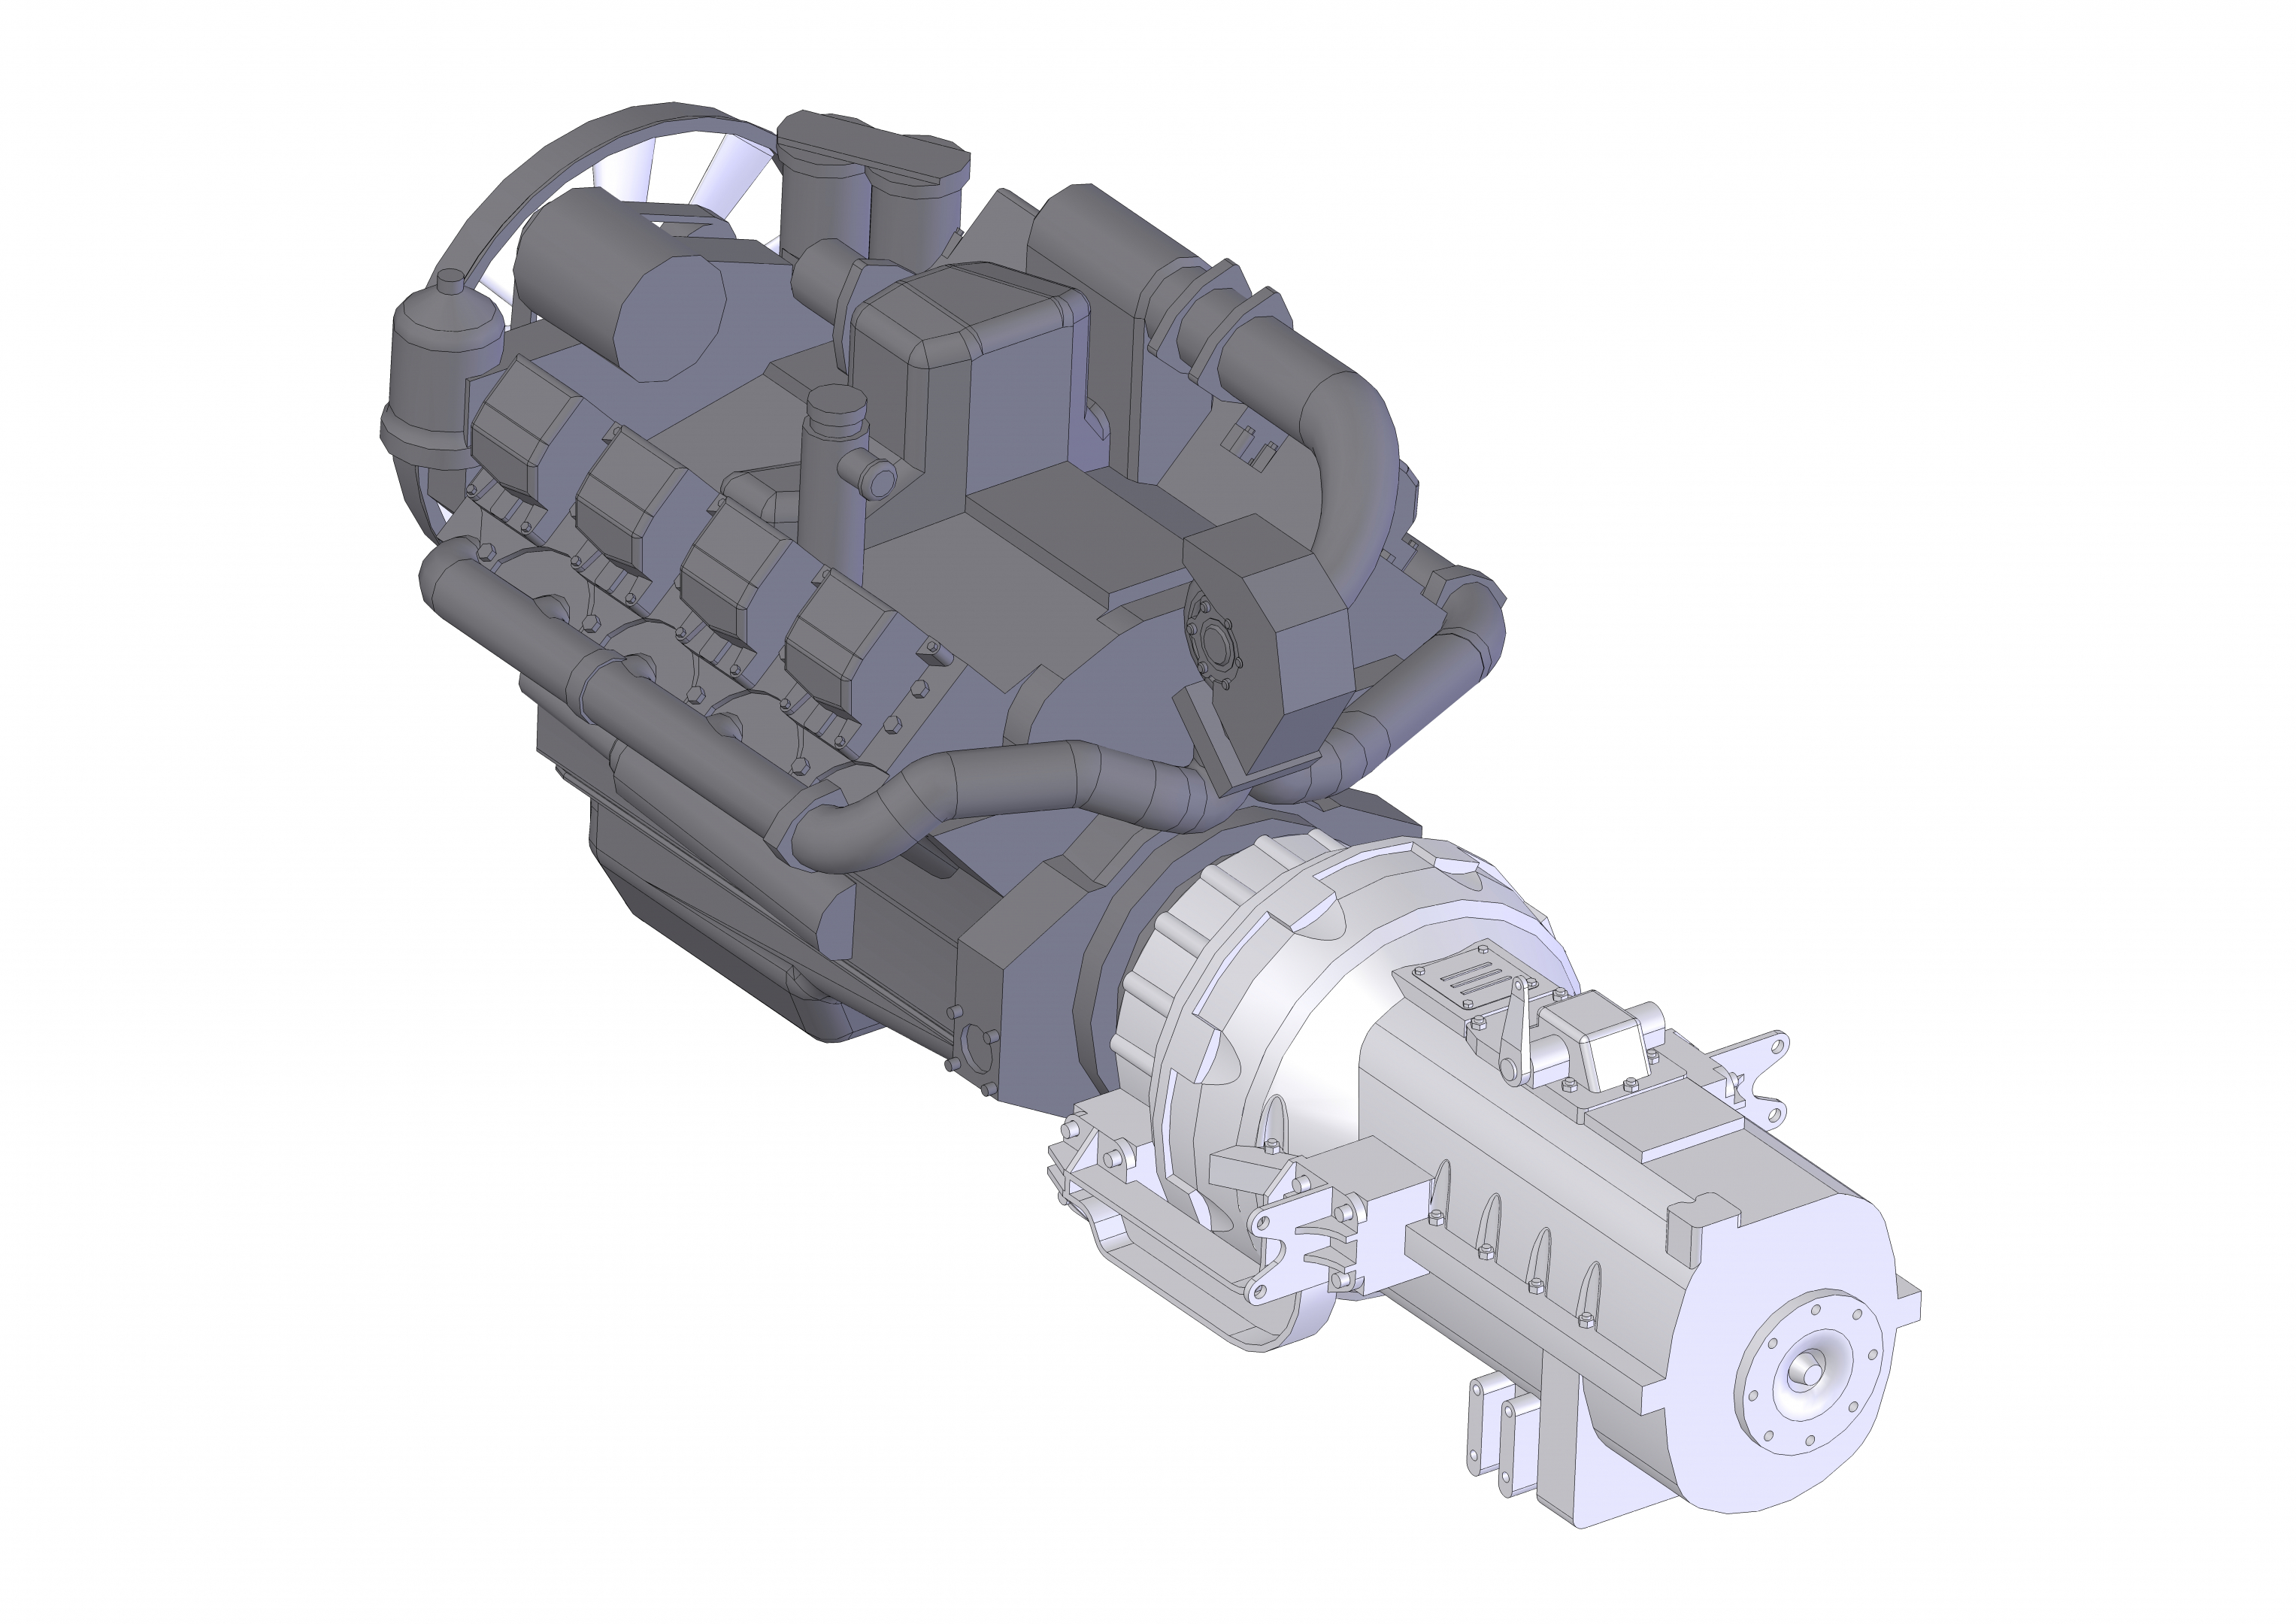 Yamz-846 in SolidWorks Other resim